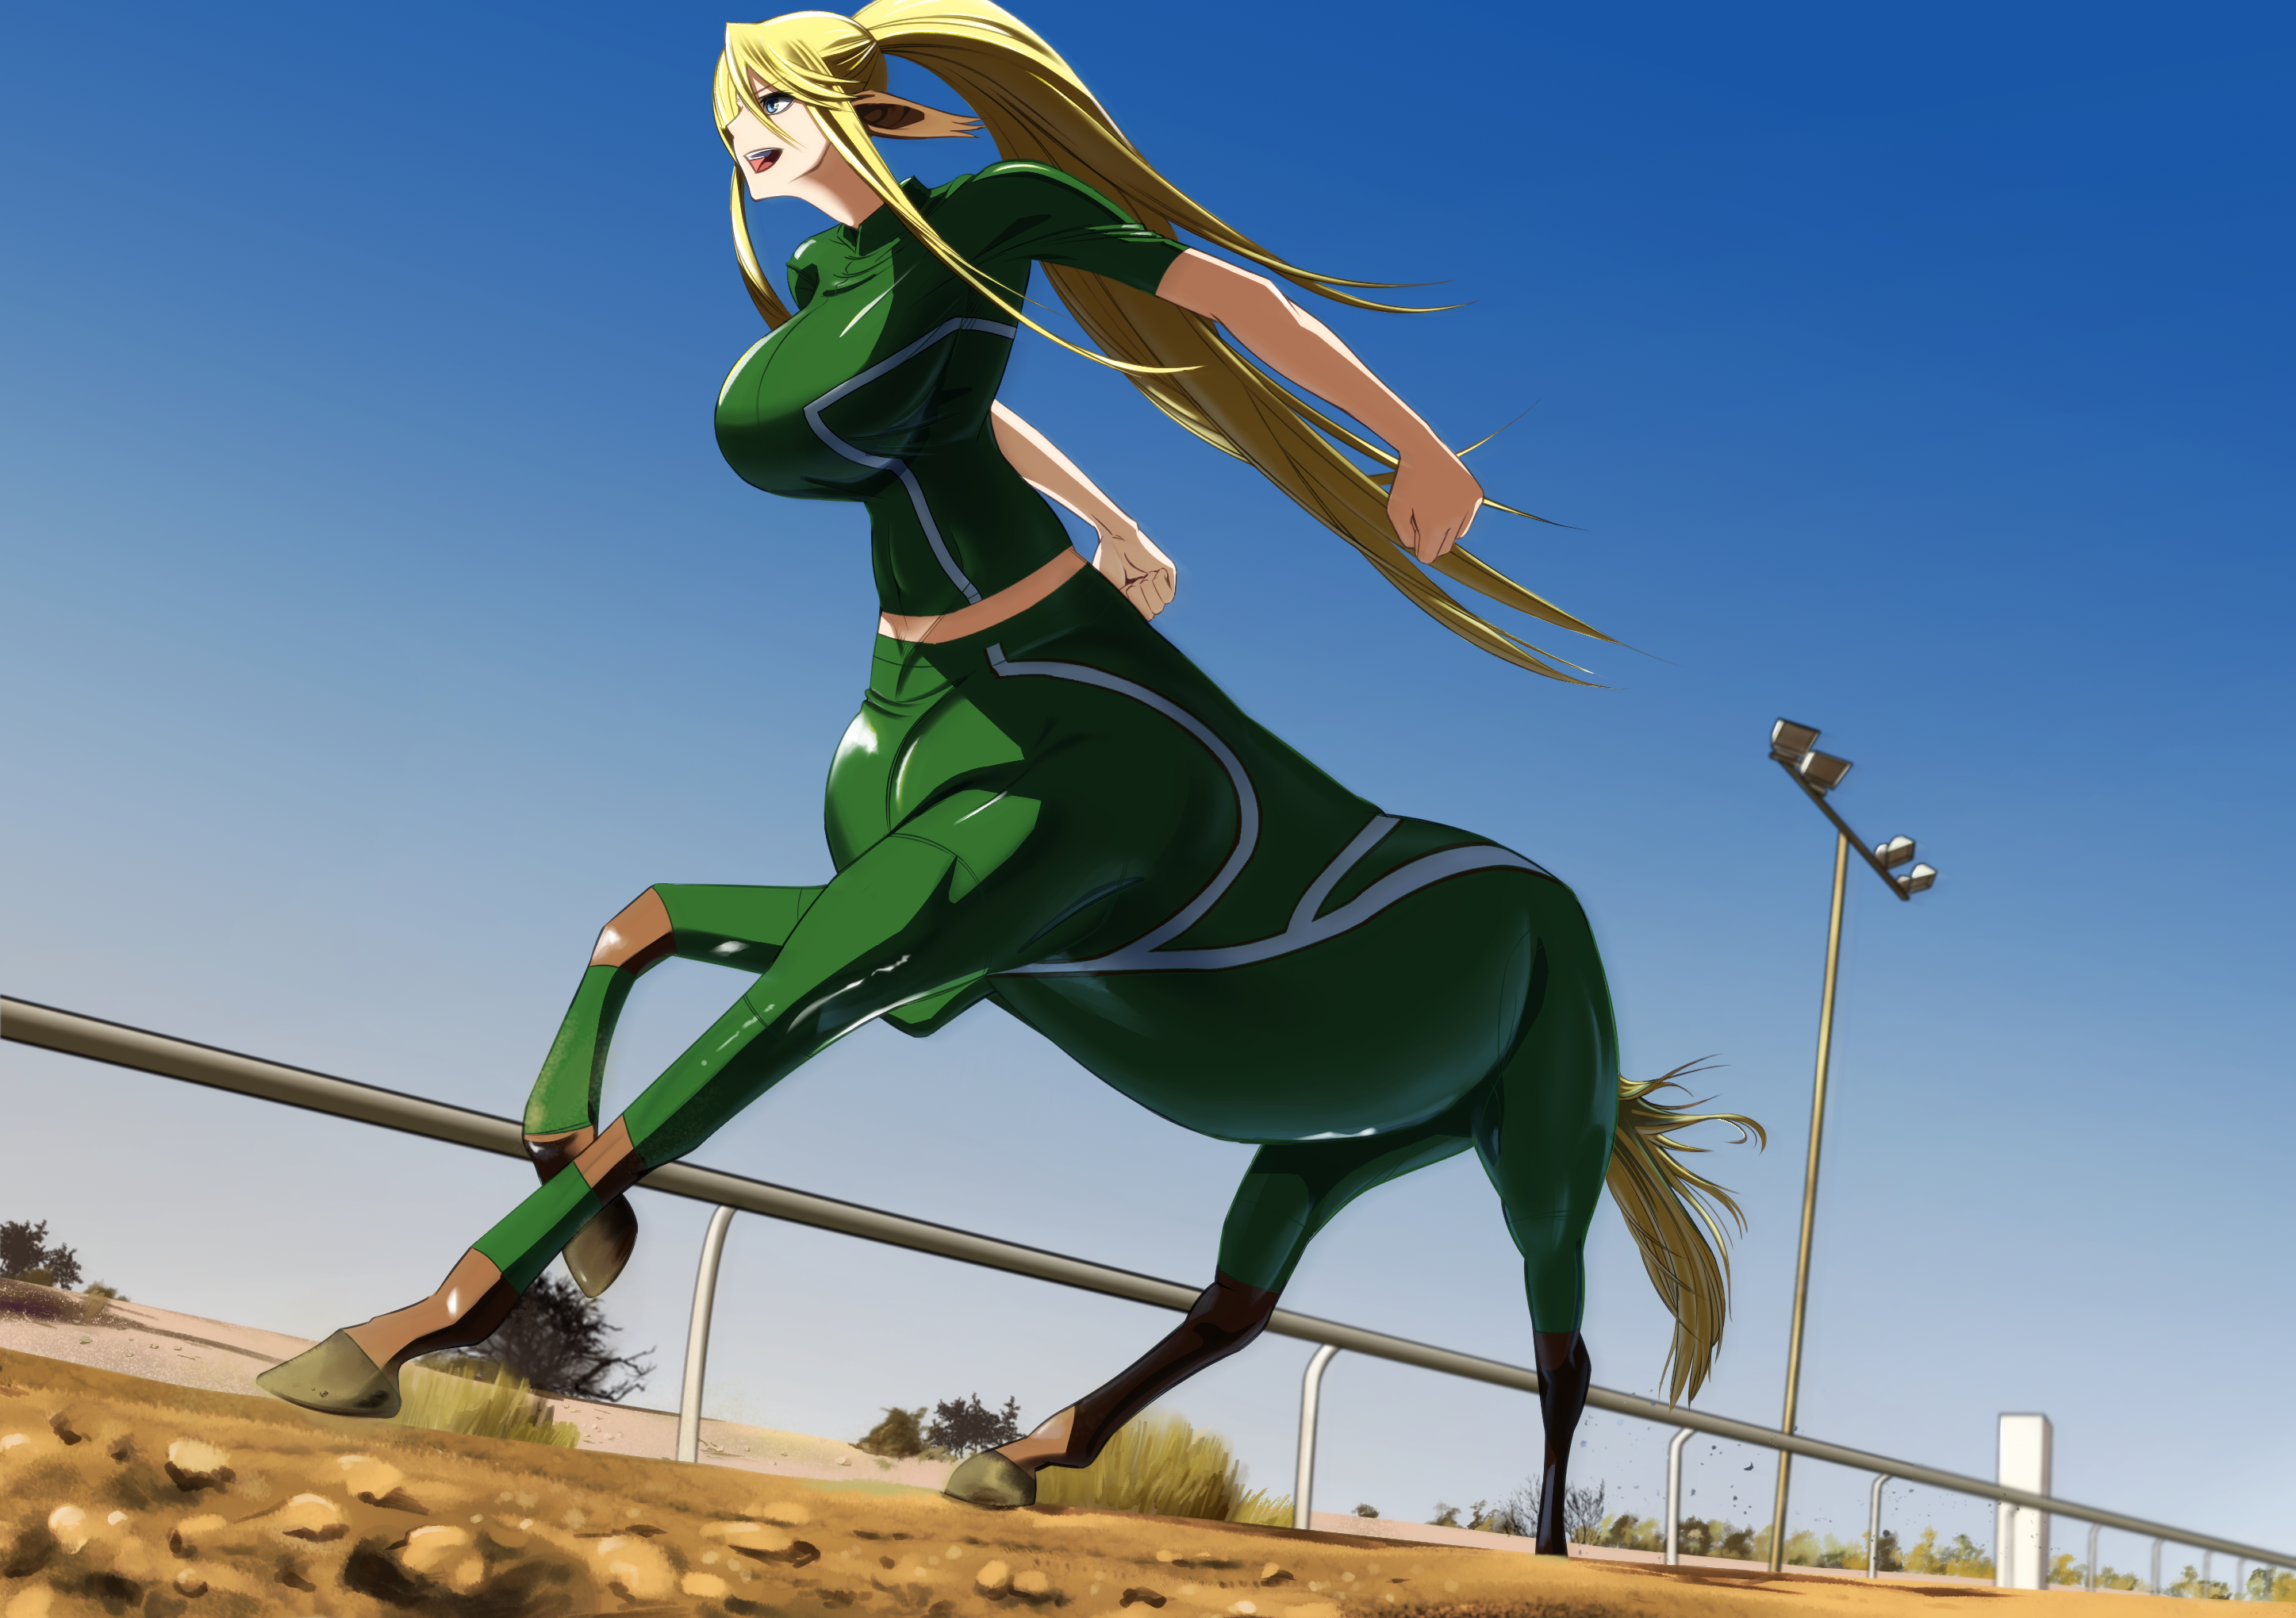 Anime 2894x2039 Monster Musume no Iru Nichijou bodysuit big boobs long hair thighs running pointy ears anime girls monster girl ponytail Centaurs the gap exercise curvy Centorea (Monmusu) 2D low-angle open mouth looking away blue eyes tight clothing fan art blonde